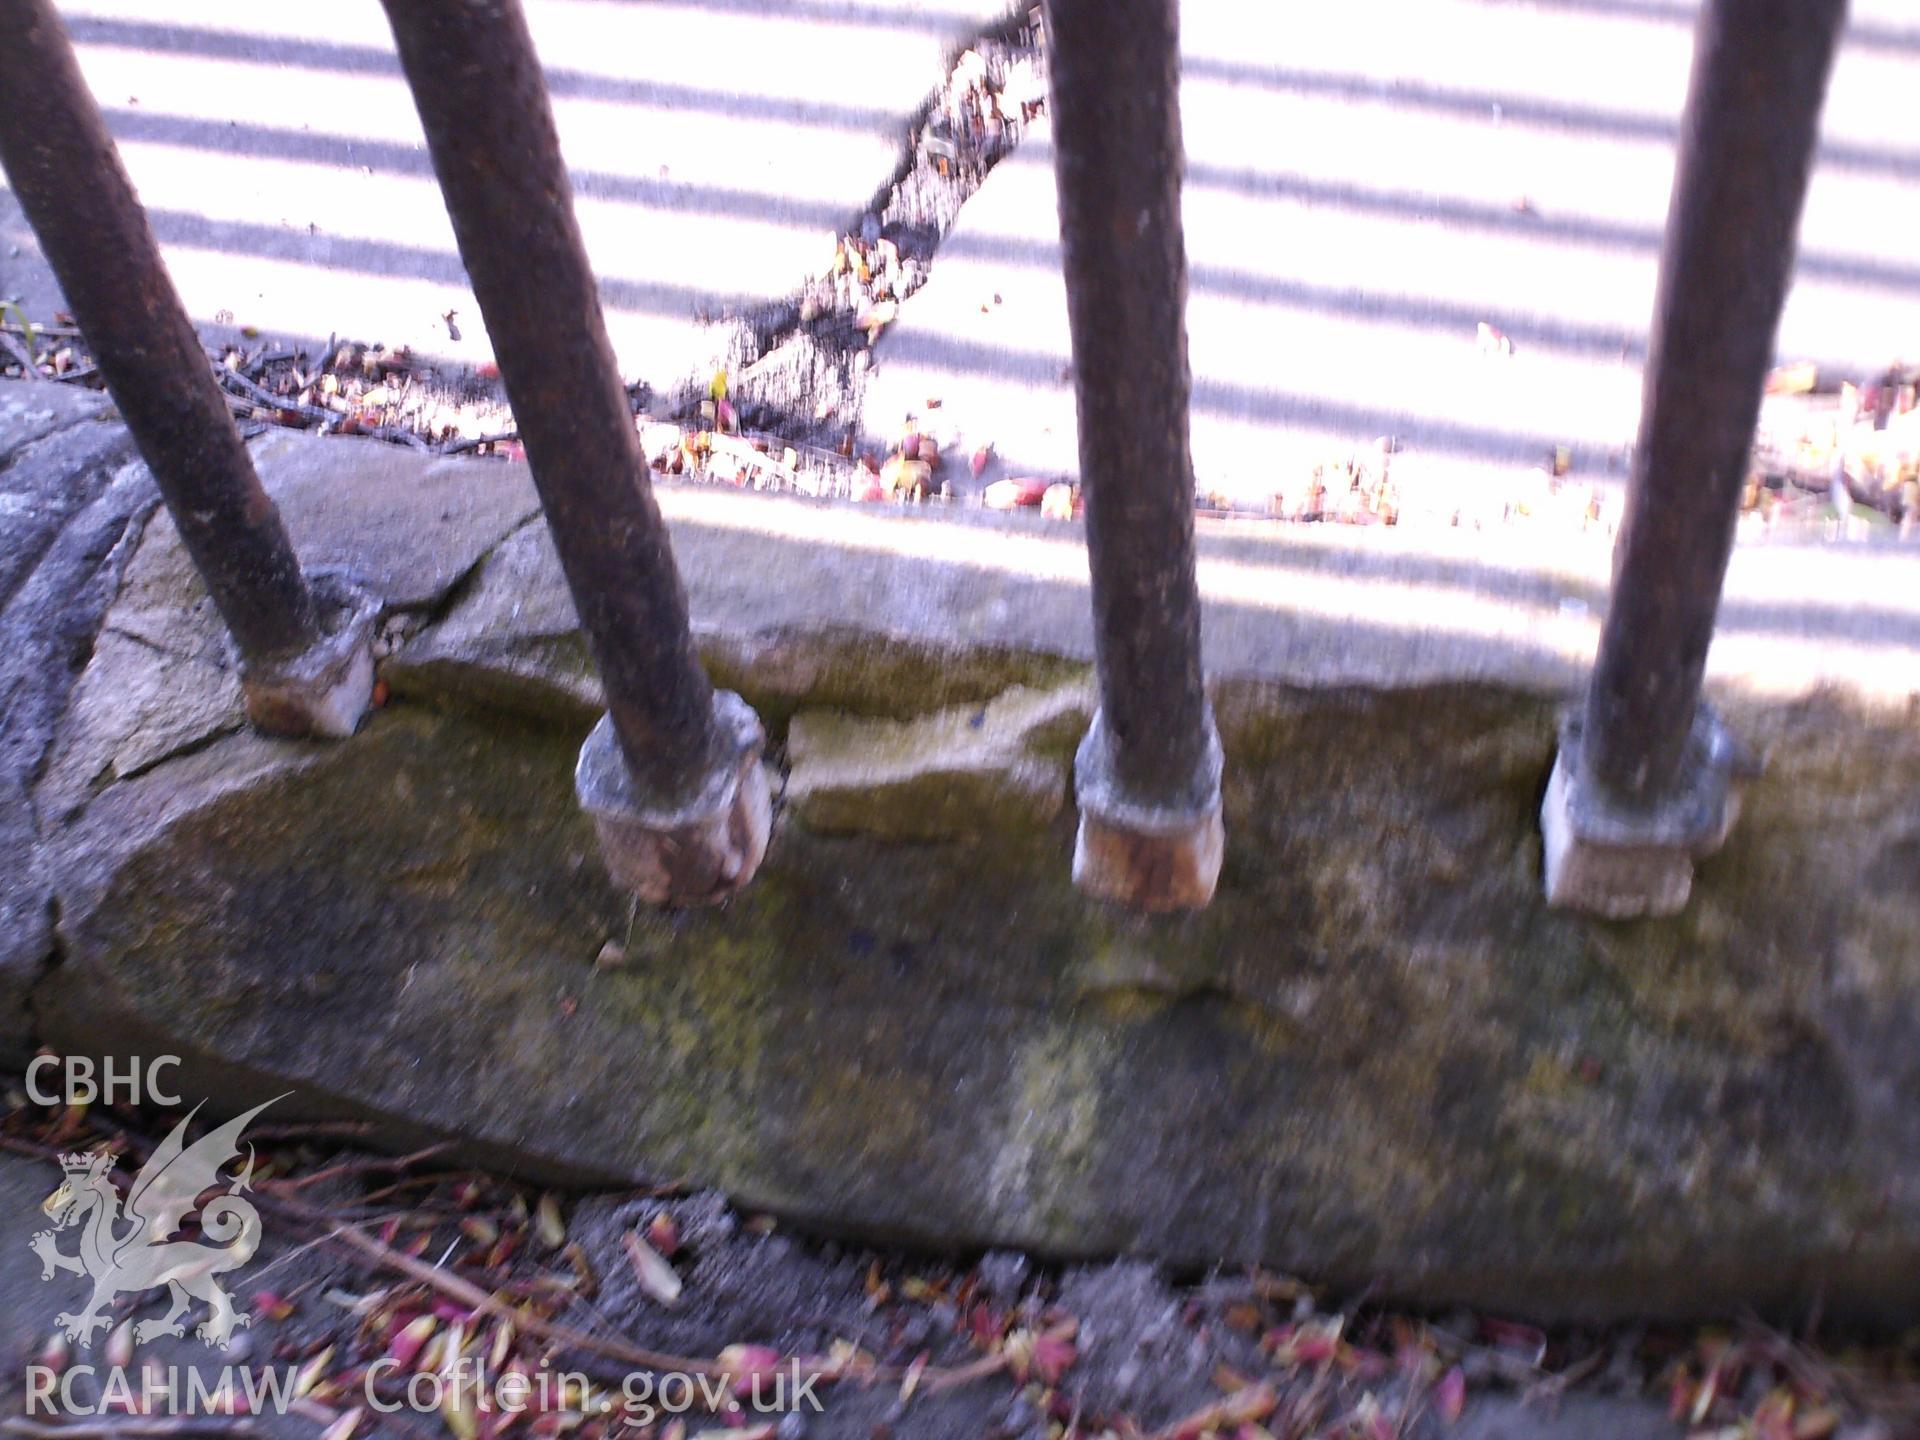 Digital image showing the crumbling state of the monument's kerb stones.